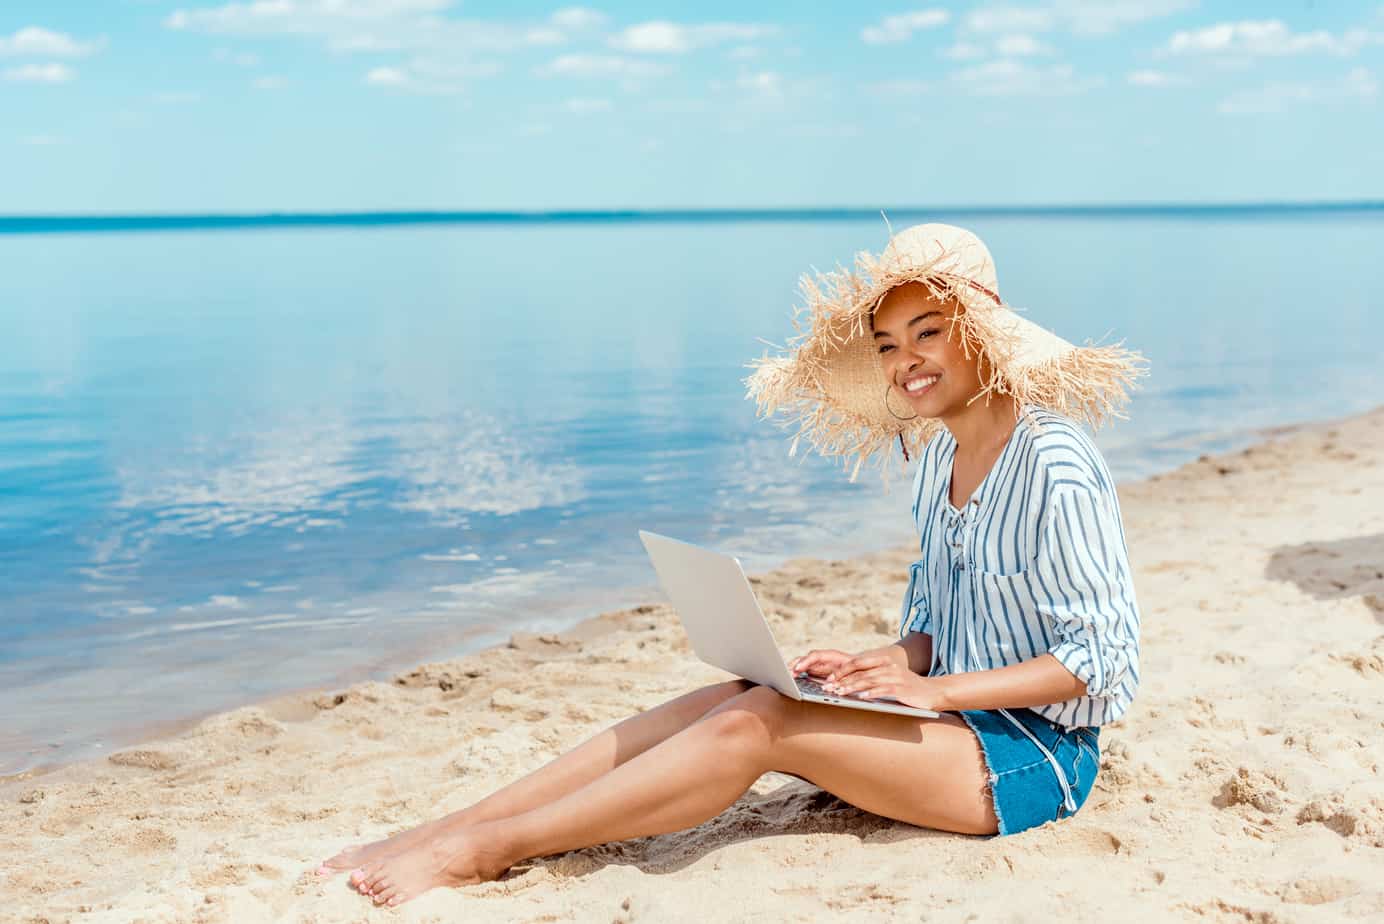 21 Fun and Easy Summer Jobs to Earn Cash in June, July & Aug